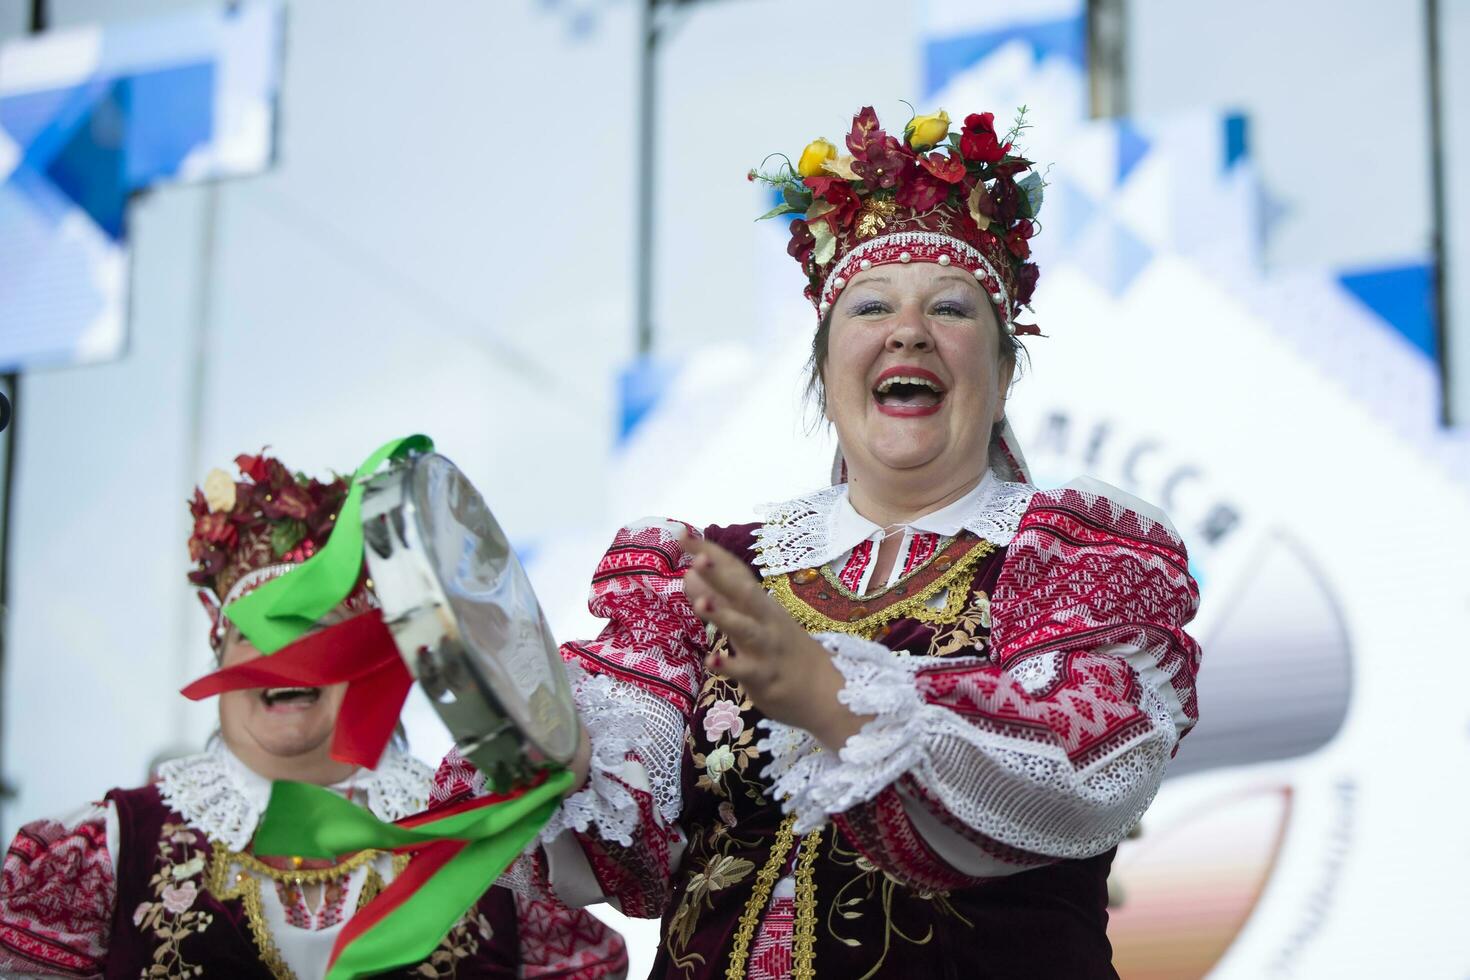 08 29 2020 Belarus, Lyaskovichi. Celebration in the city. An elderly woman in national Slavic clothes sings. photo